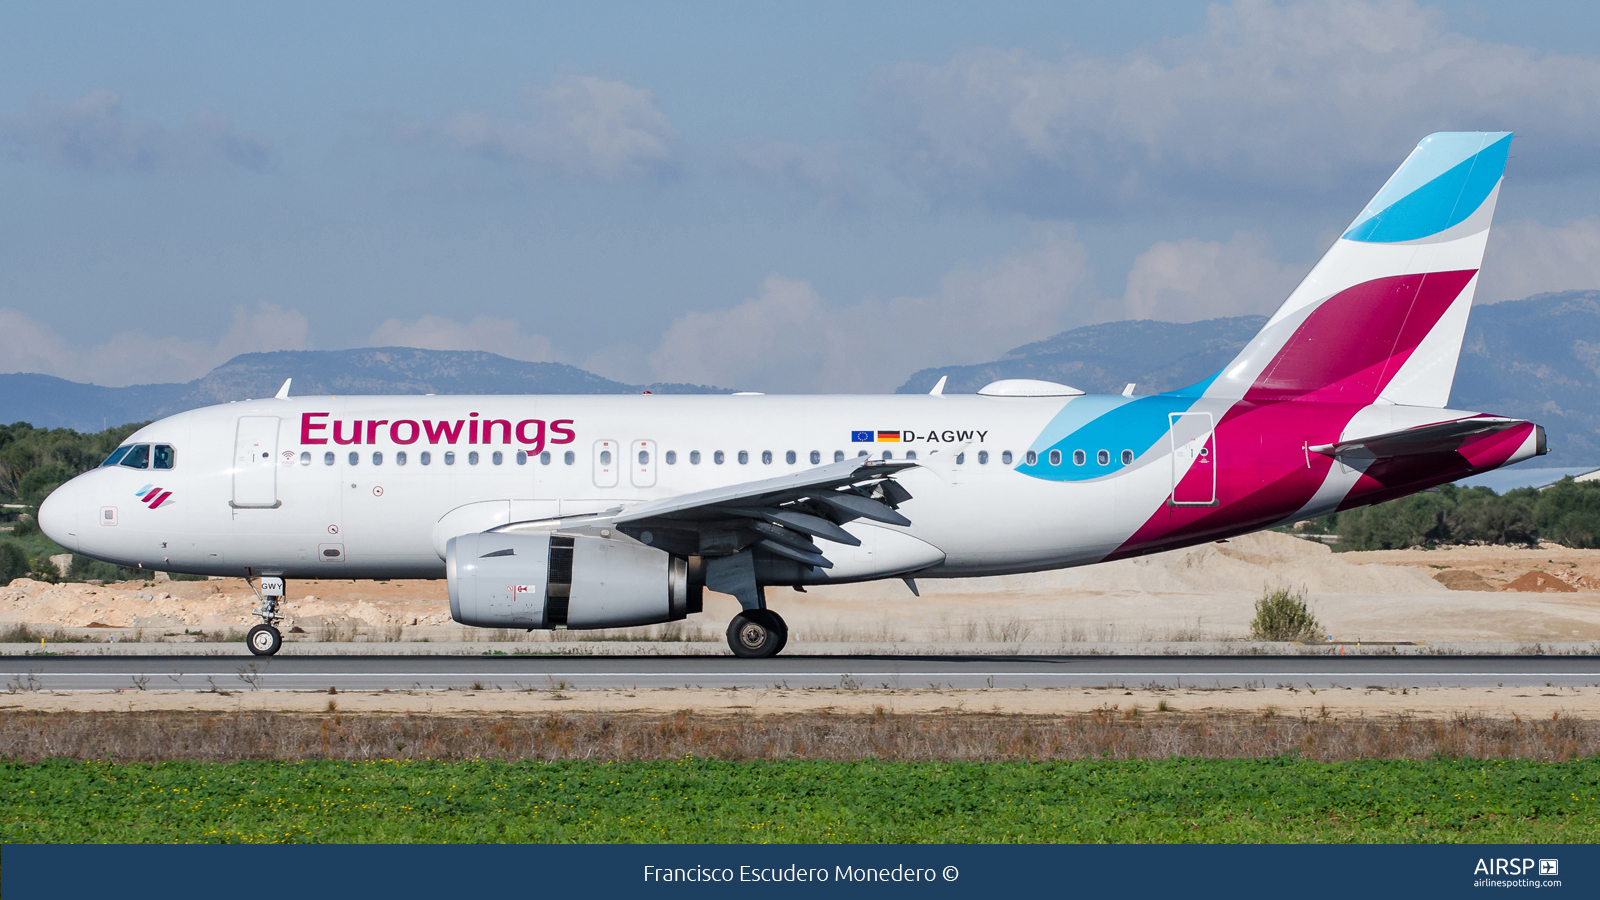 Eurowings  Airbus A319  D-AGWY